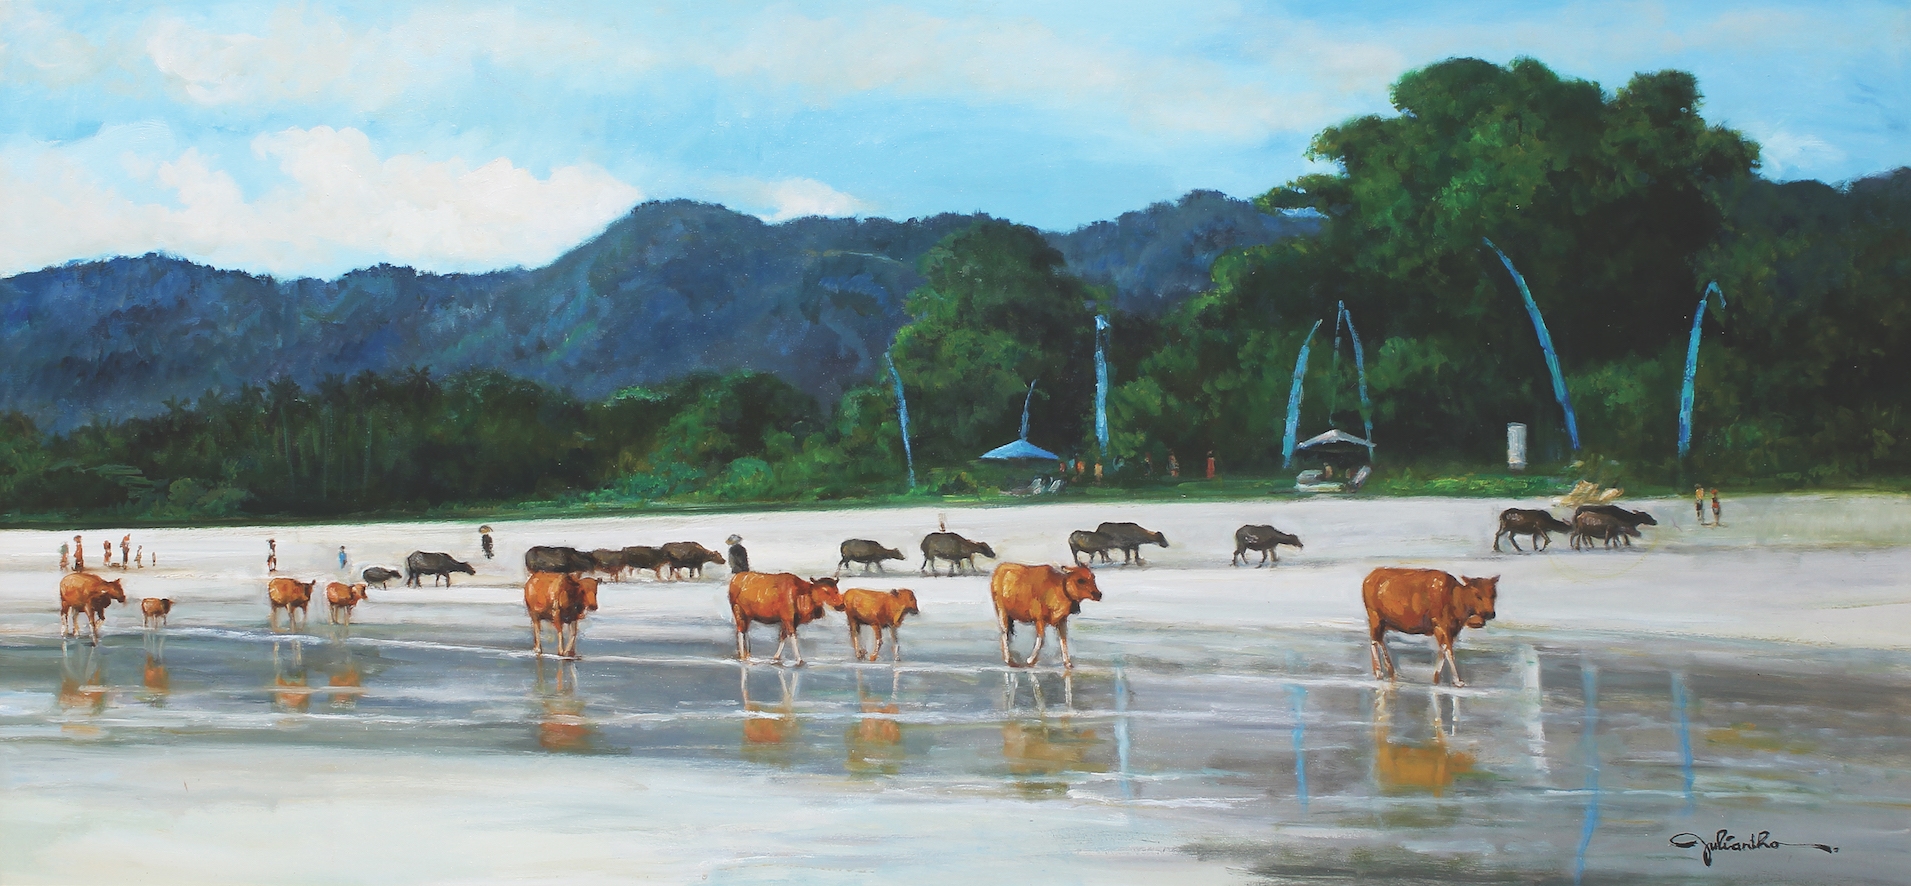 Cows and Buffaloes on The Beach by Yuliantho Wiryasaputra